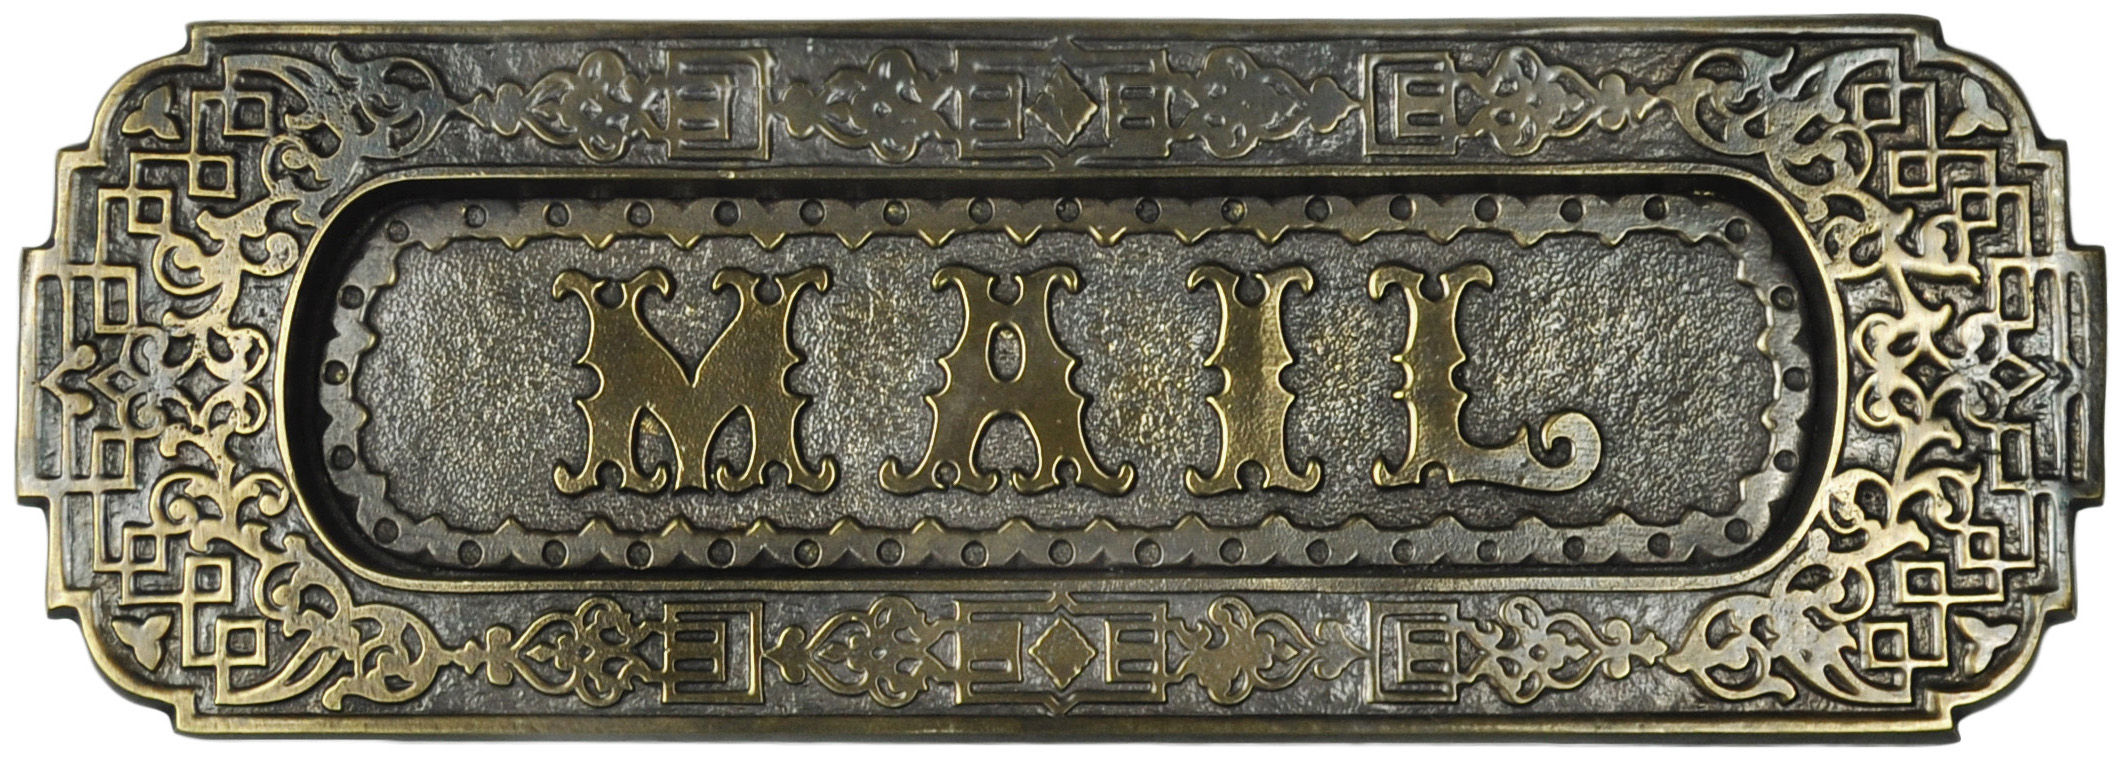 Antique Brass Mail Slots For Doors